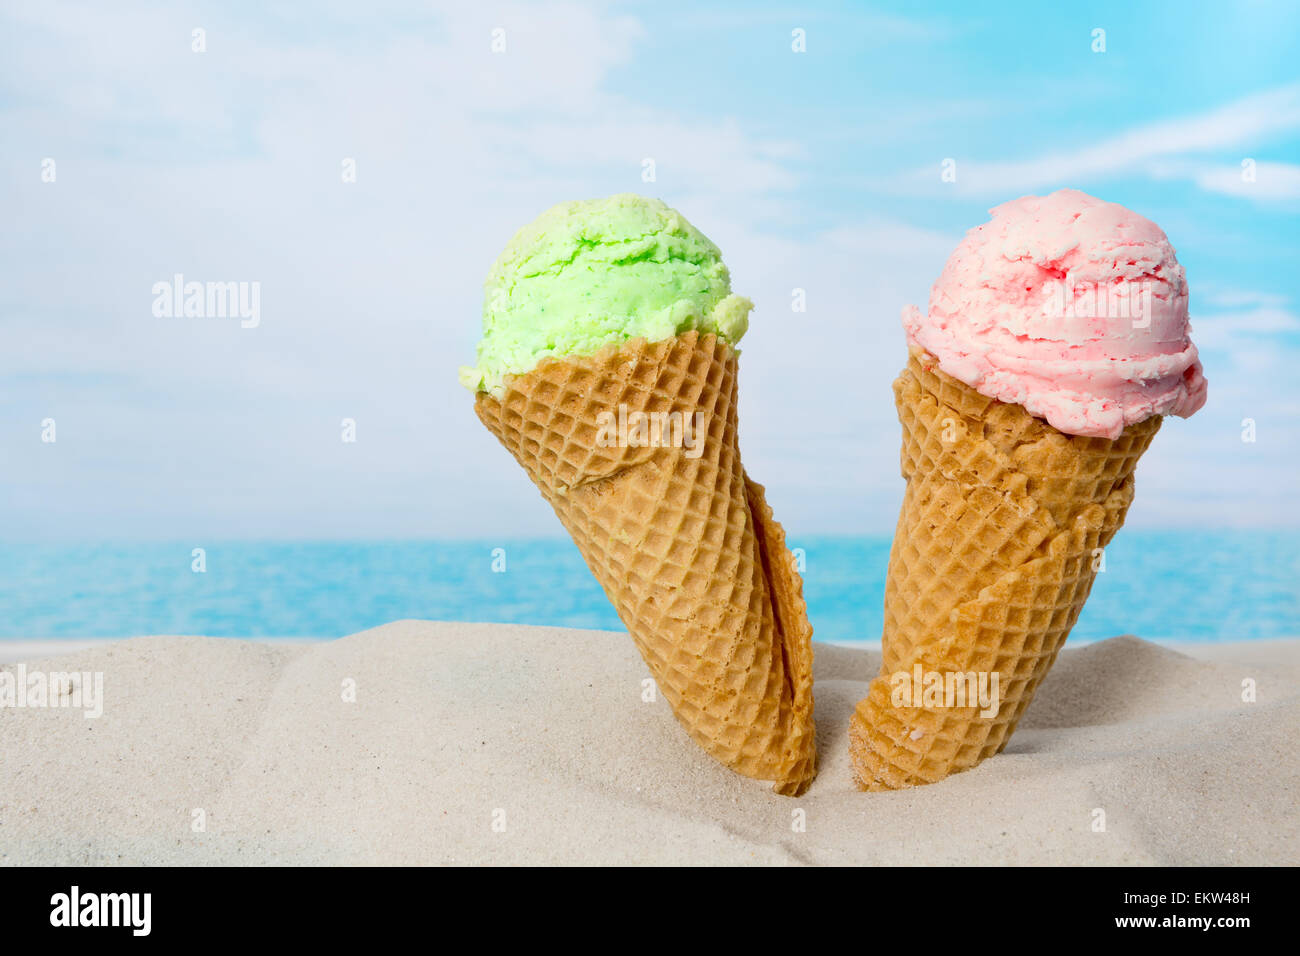 Funny image of two ice cream cones in the beach sand Stock Photo